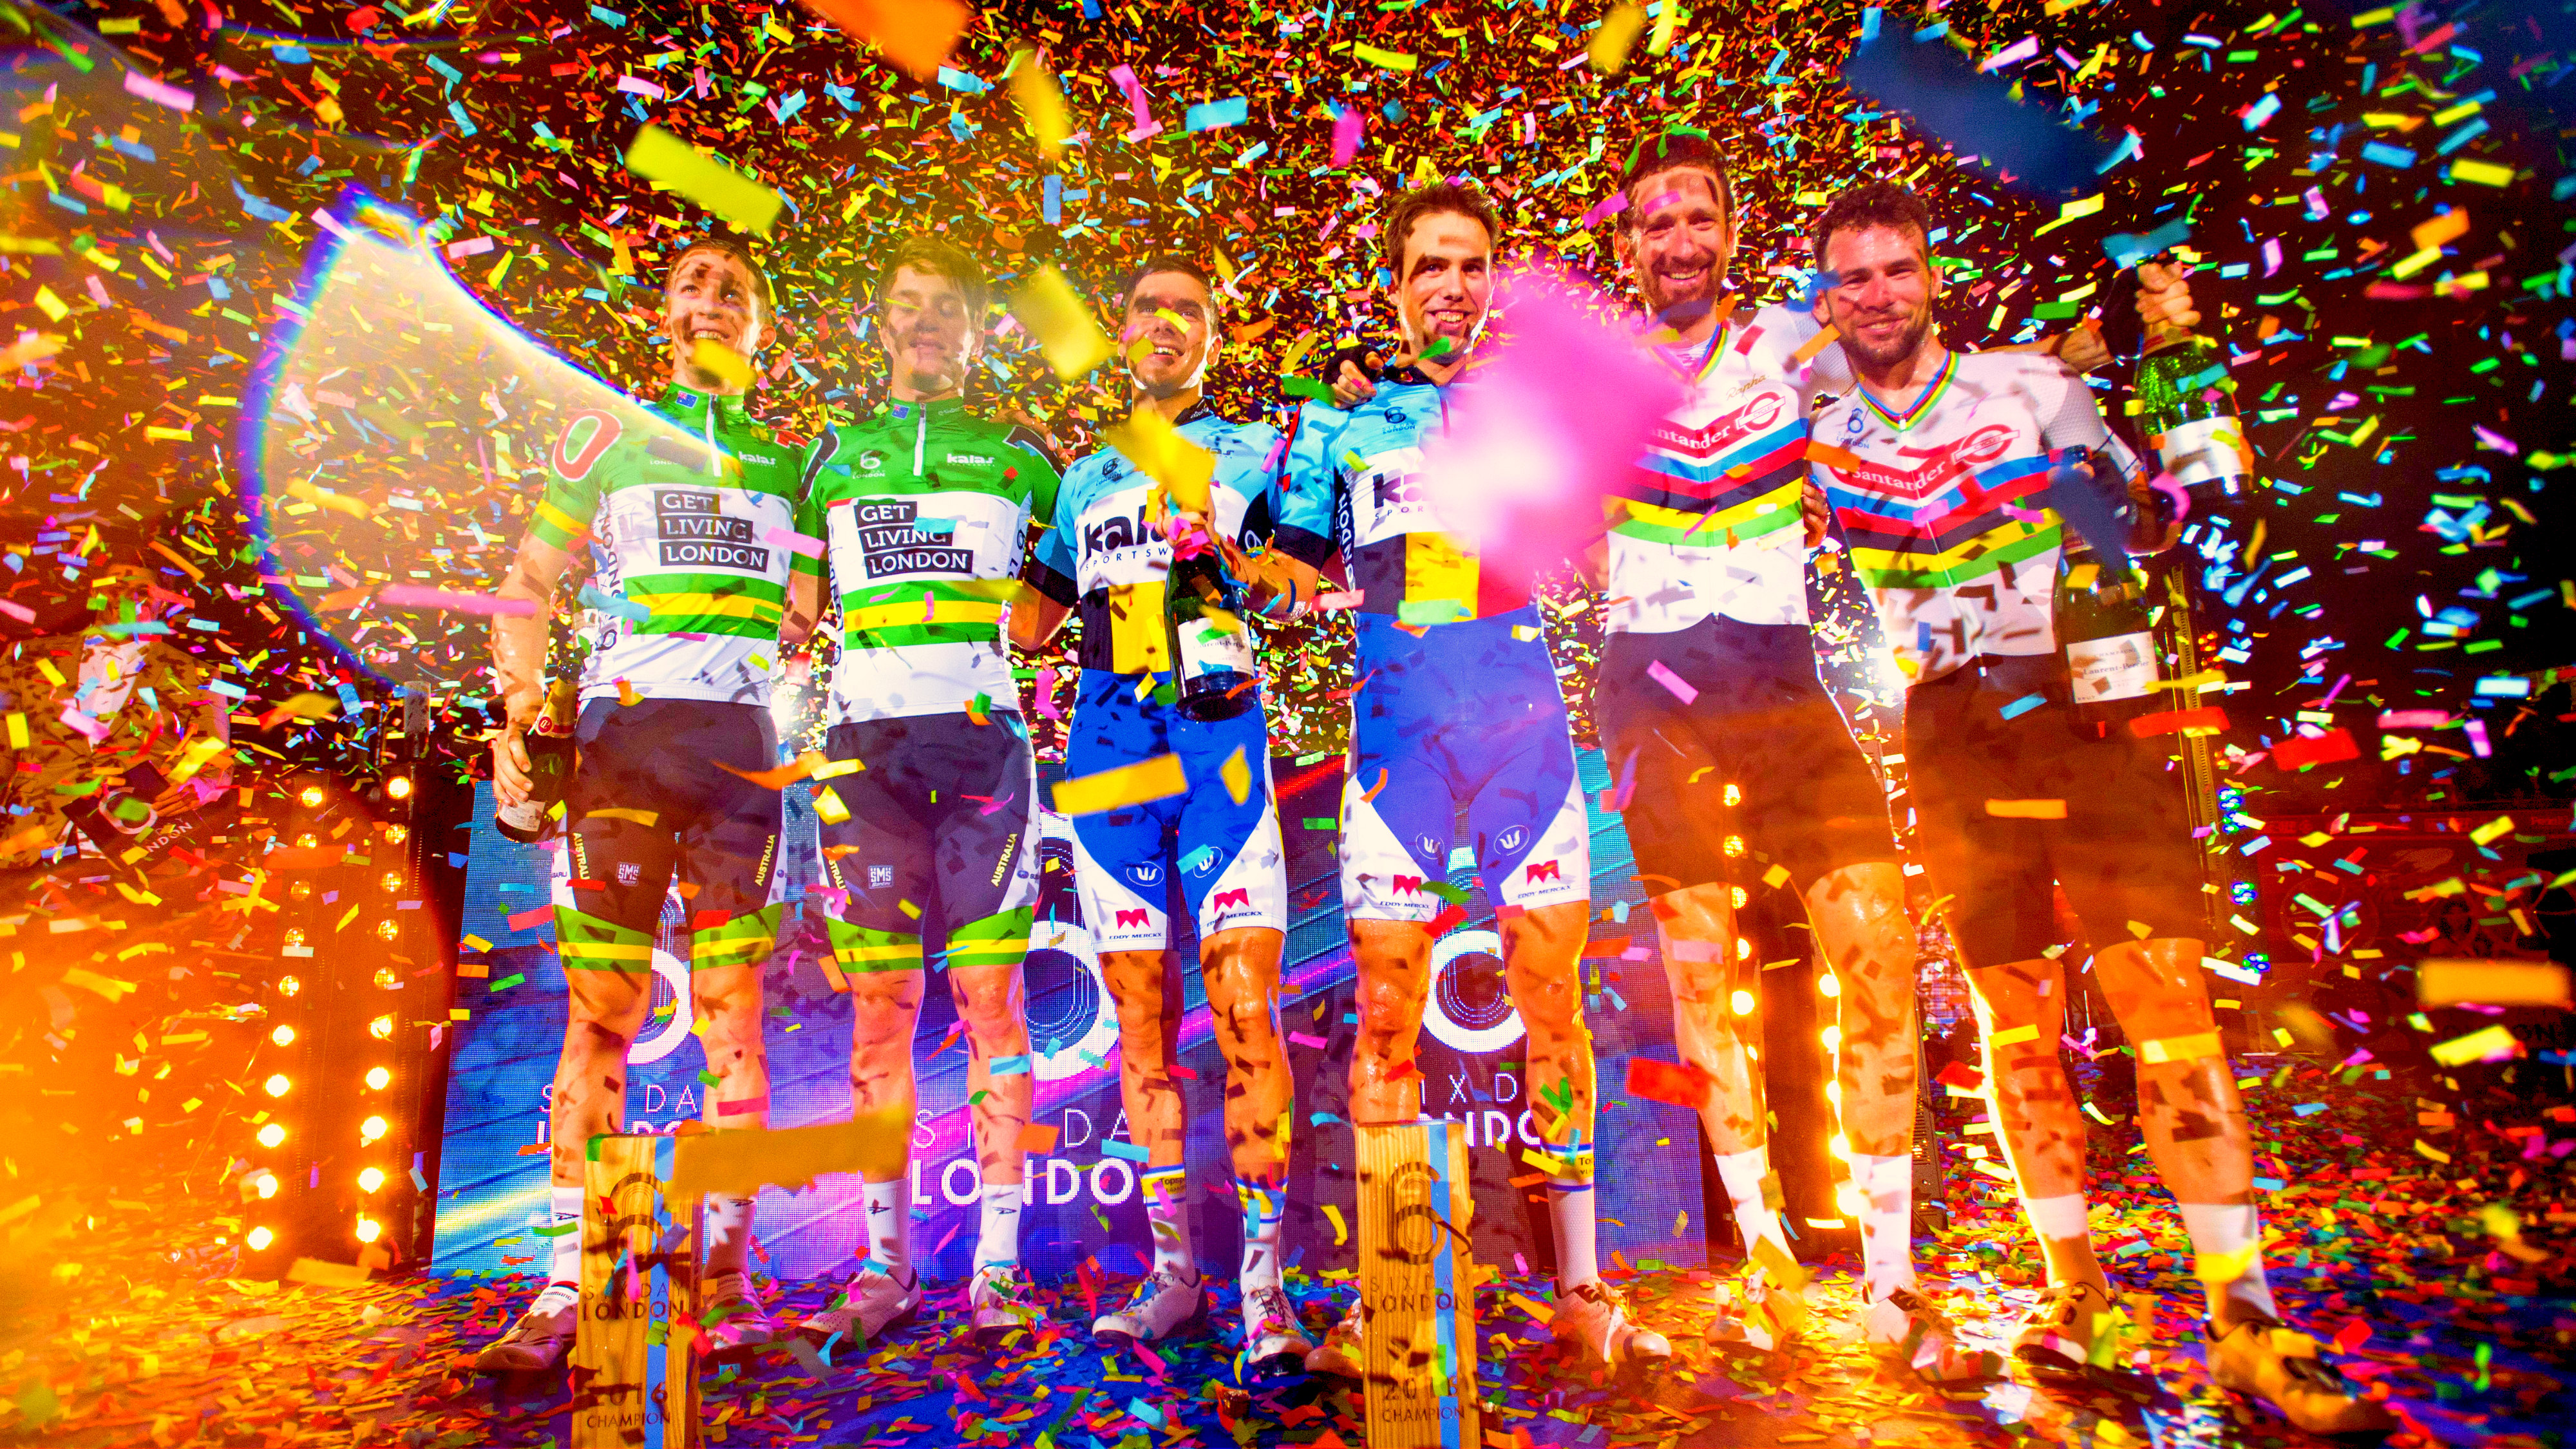 Cyclists including Sir Bradley Wiggins and Mark Cavendish celebrate after the Six Day London competition